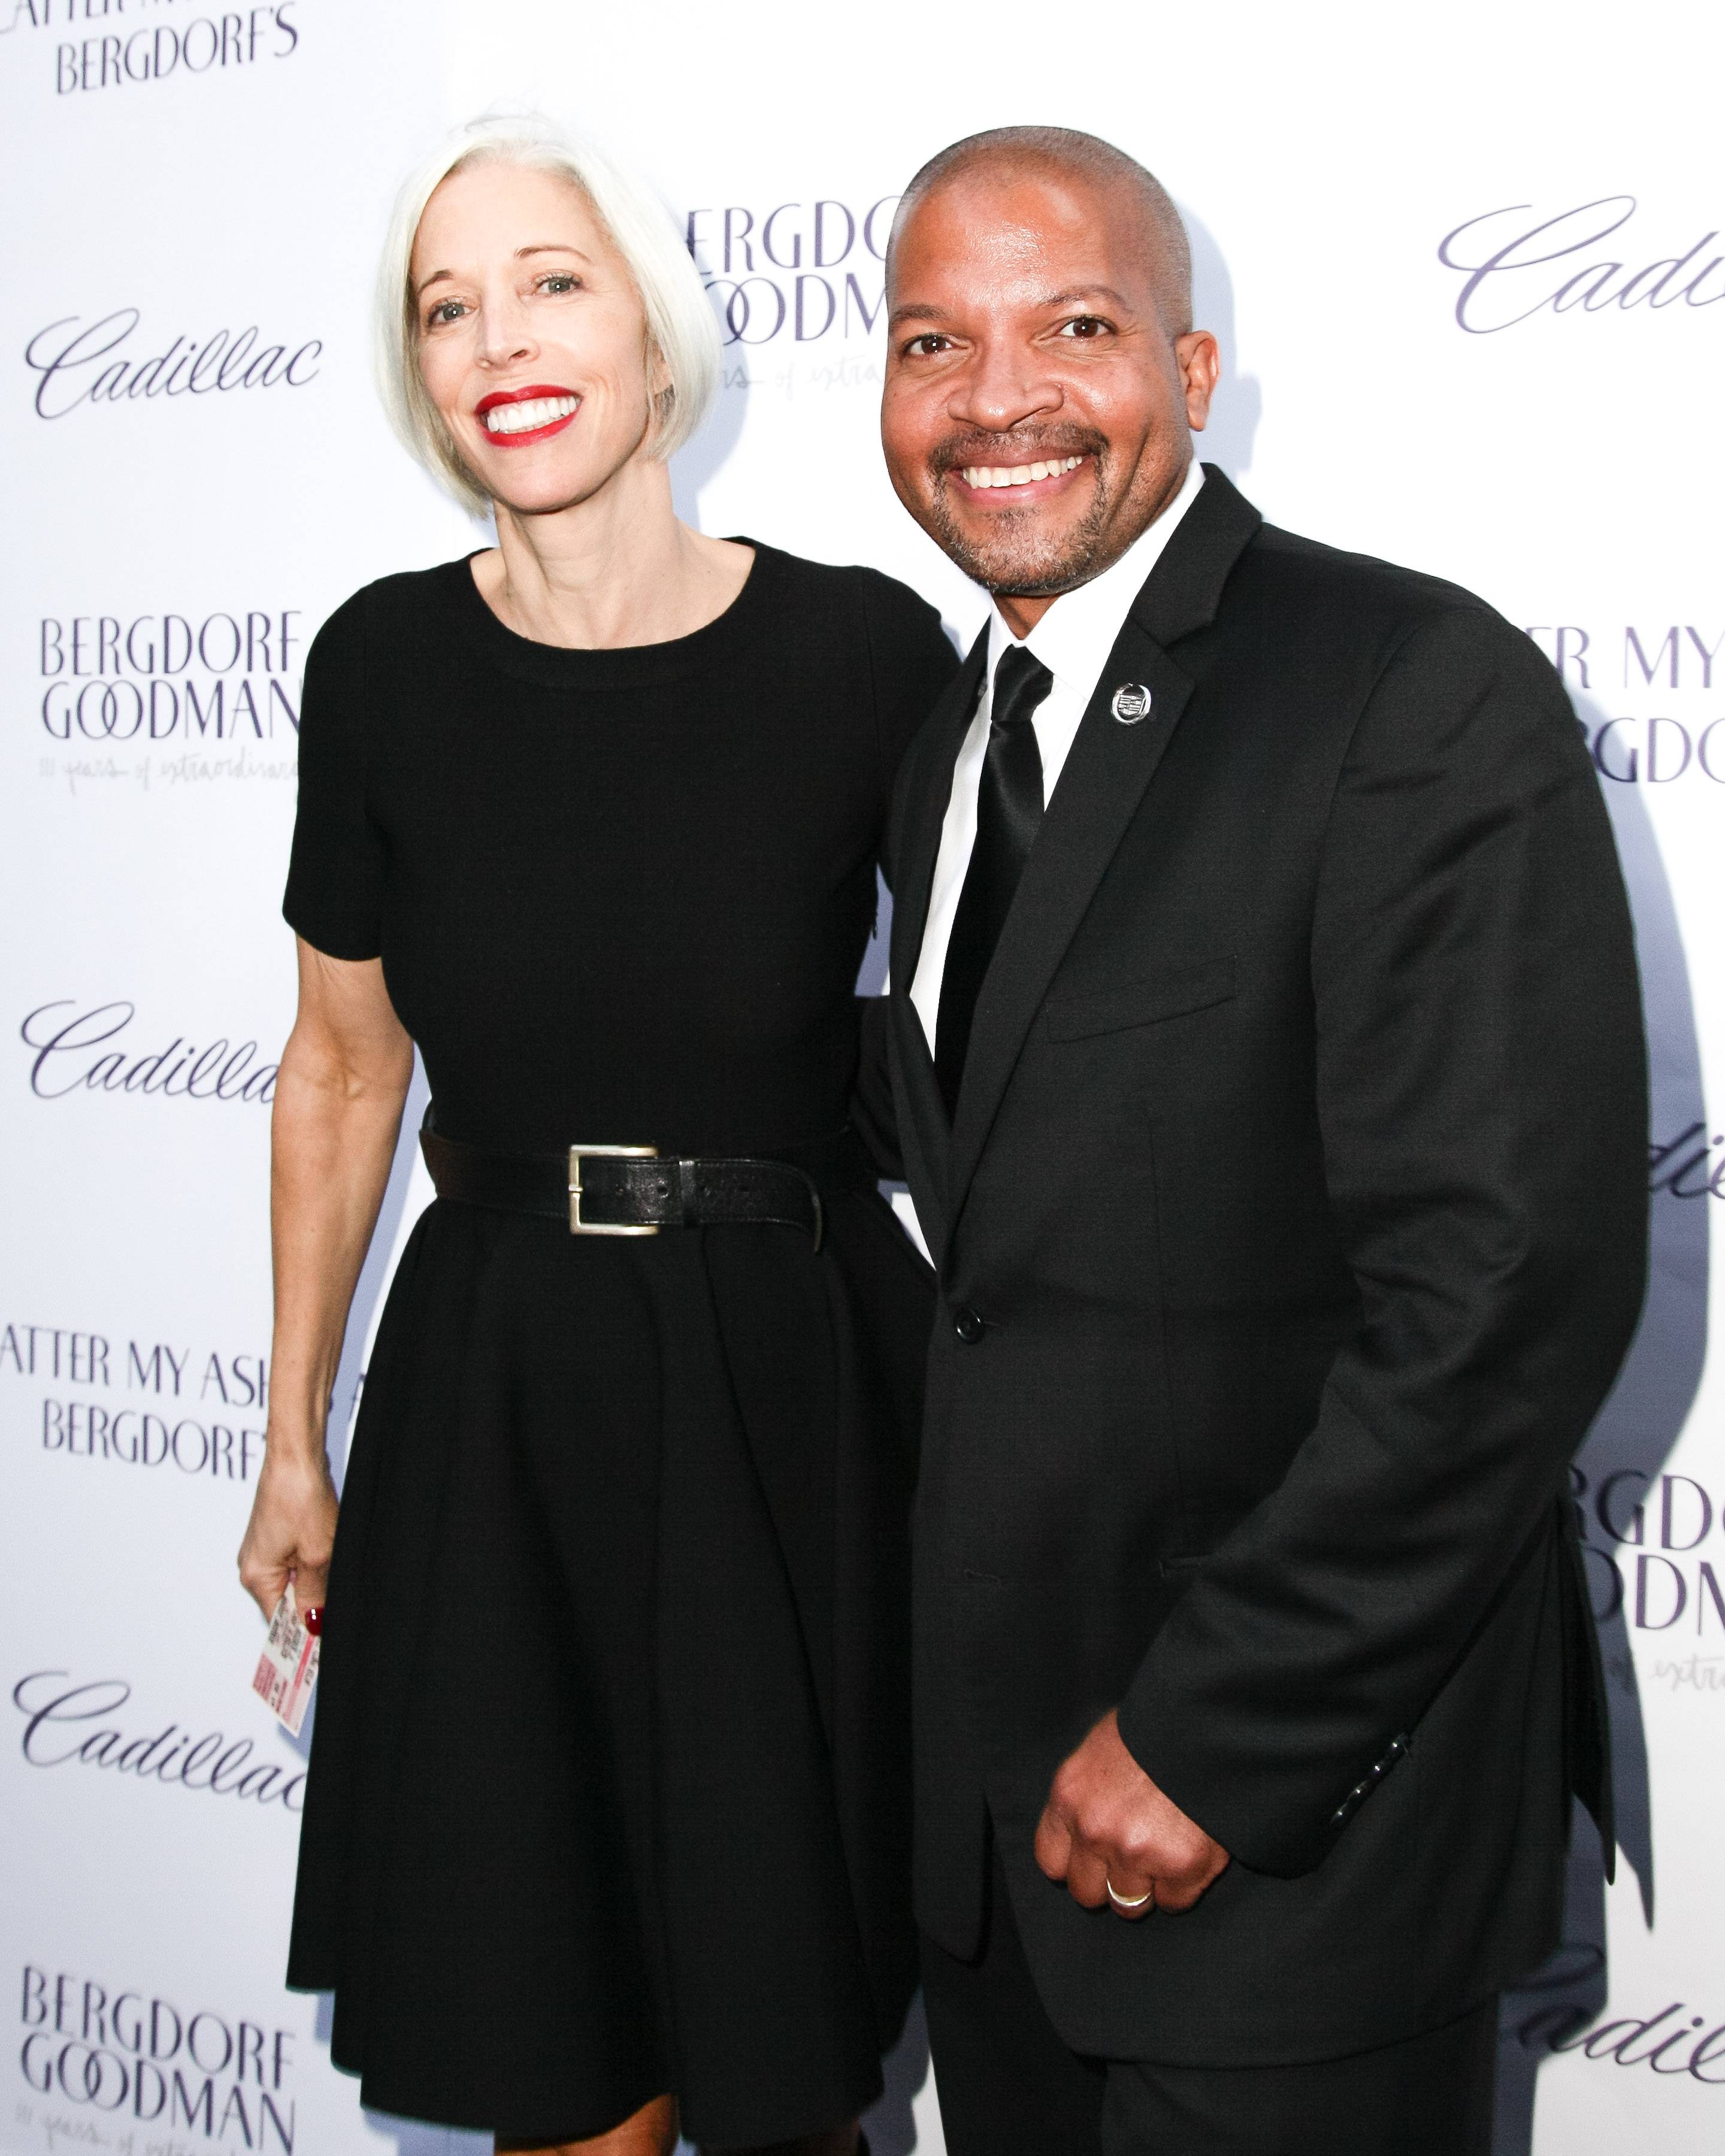 BERGDORF GOODMAN and CADILLAC host a special screening of “Scatter My Ashes at Bergdorf’s” in celebration of the store’s 111th Anniversary